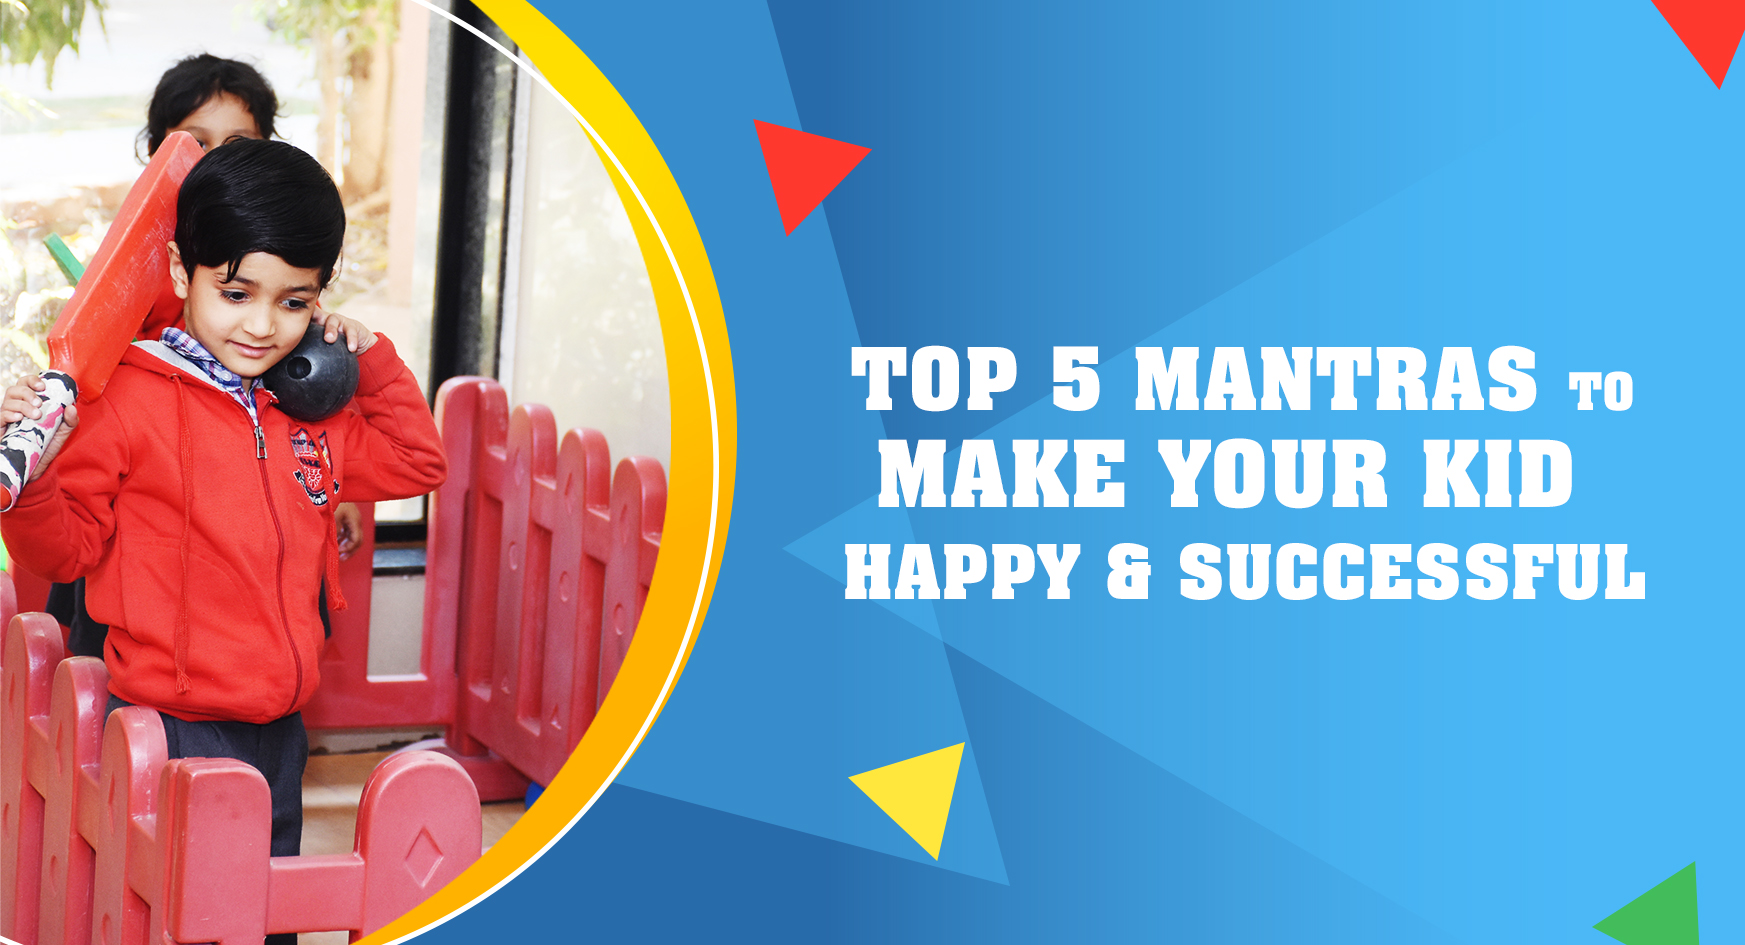 Top 5 Mantras to make your kid Happy & Successful